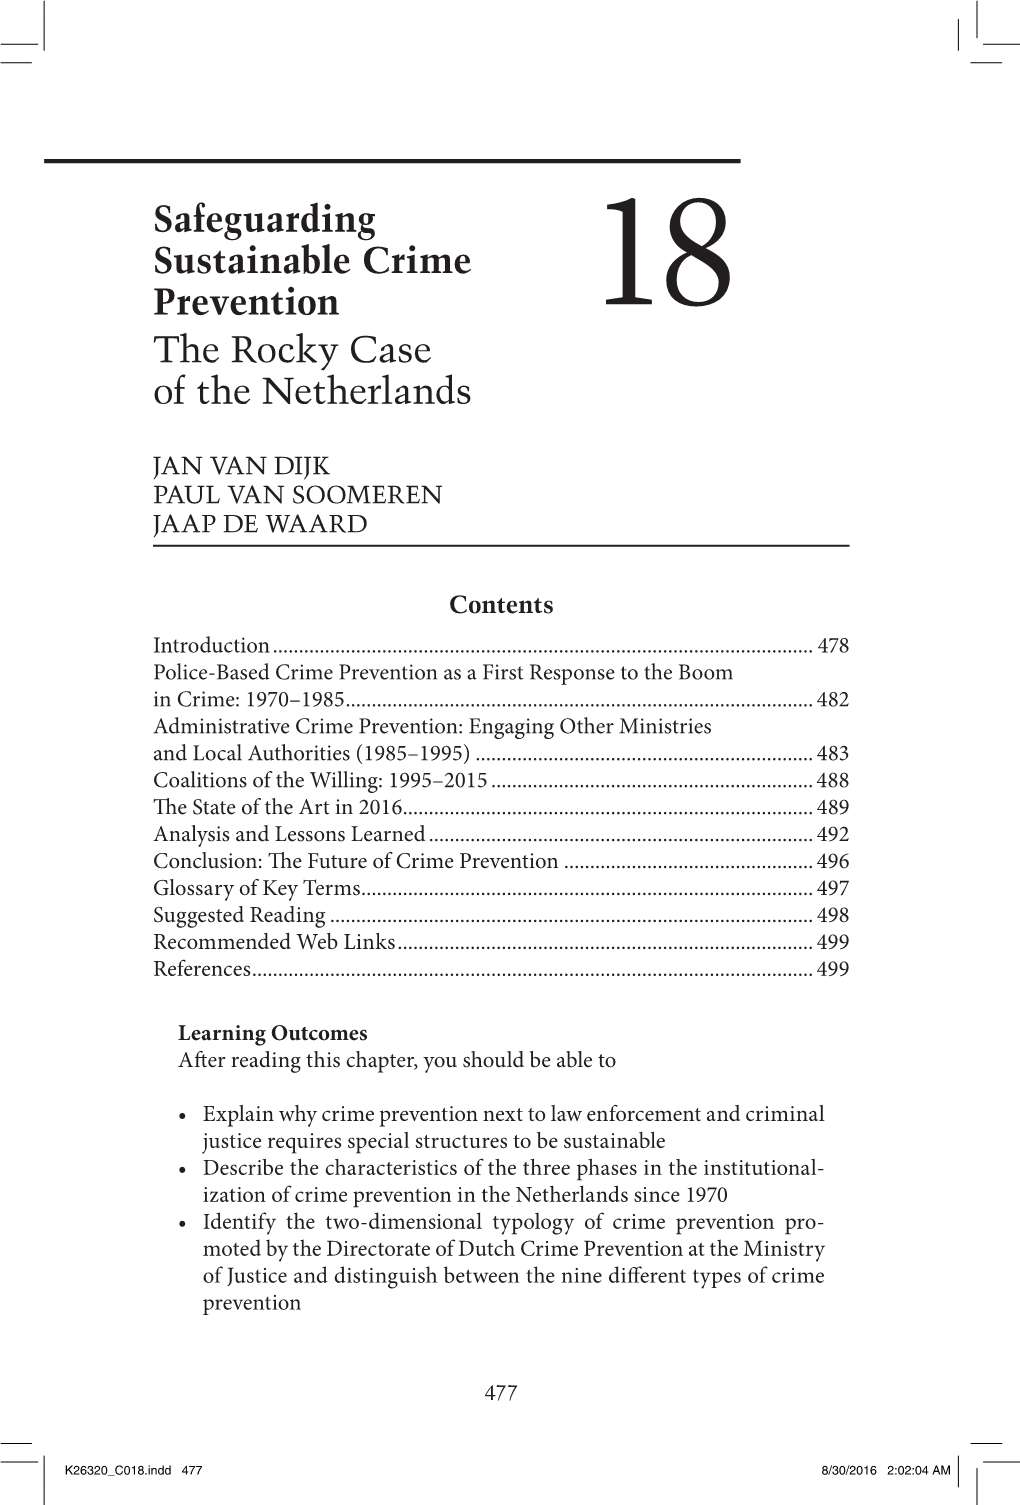 Safeguarding Sustainable Crime Prevention the Rocky Case of The